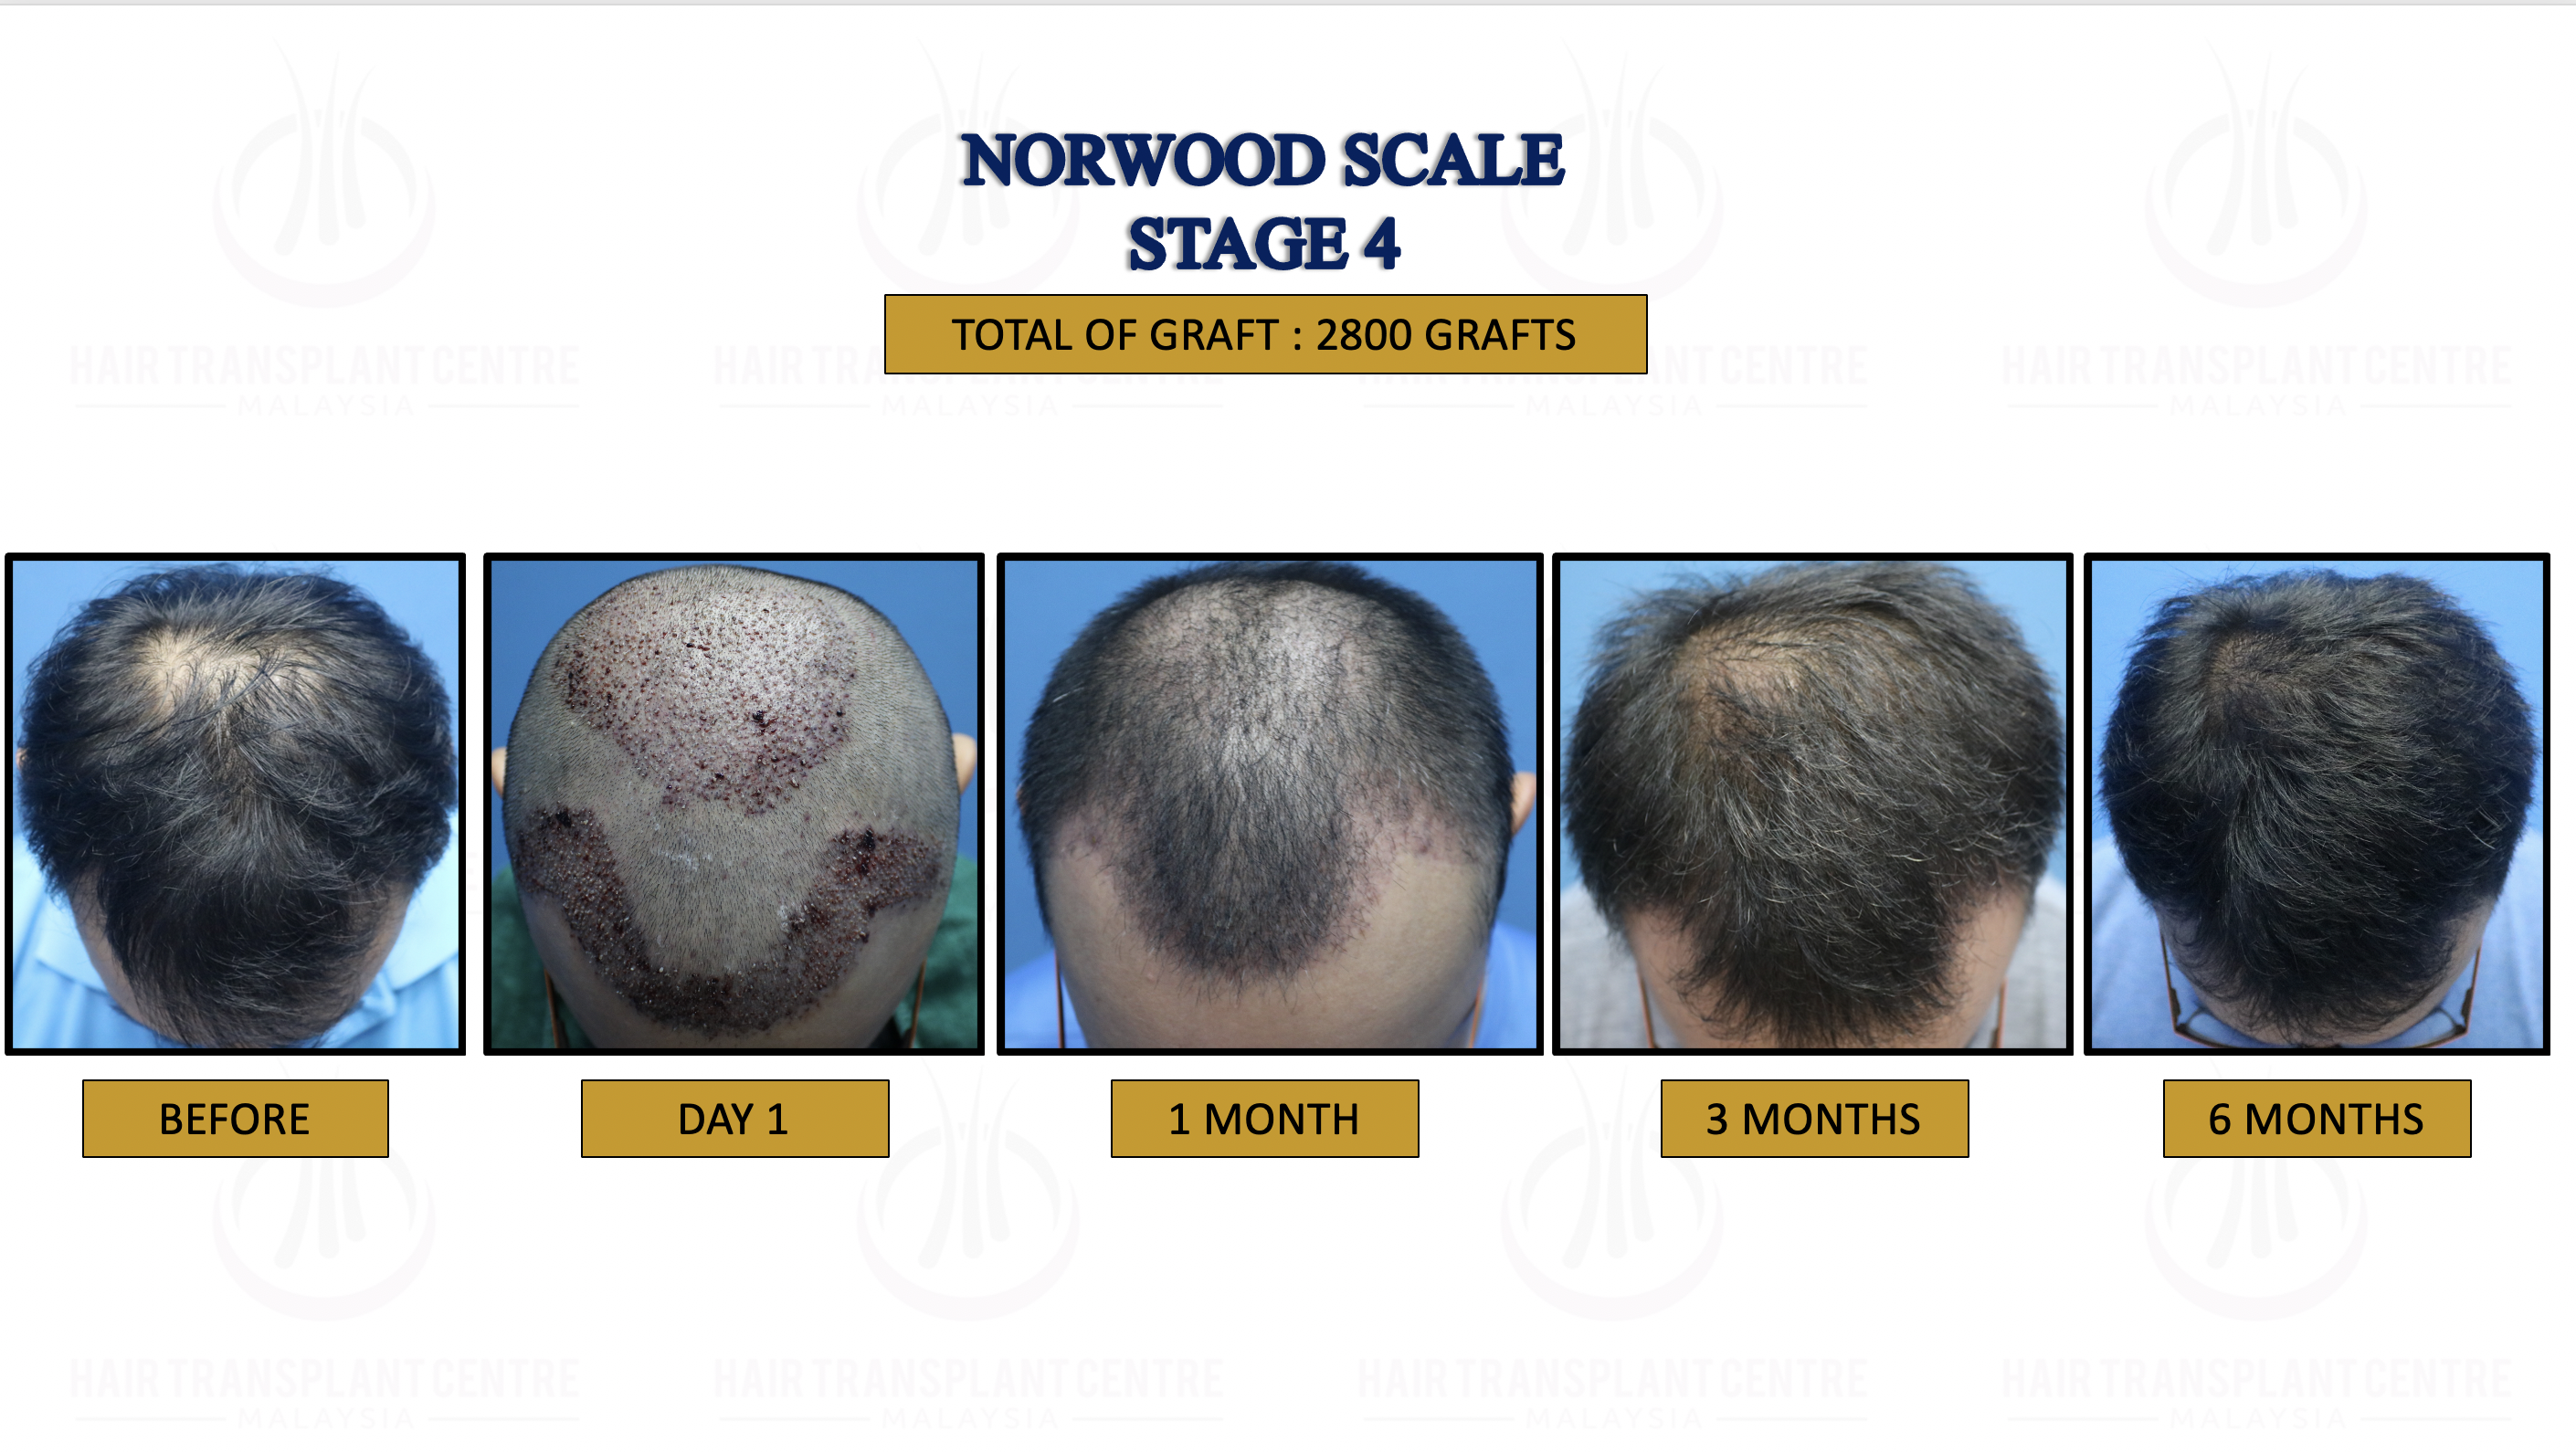 5. NORWOOD SCALE STAGE 4